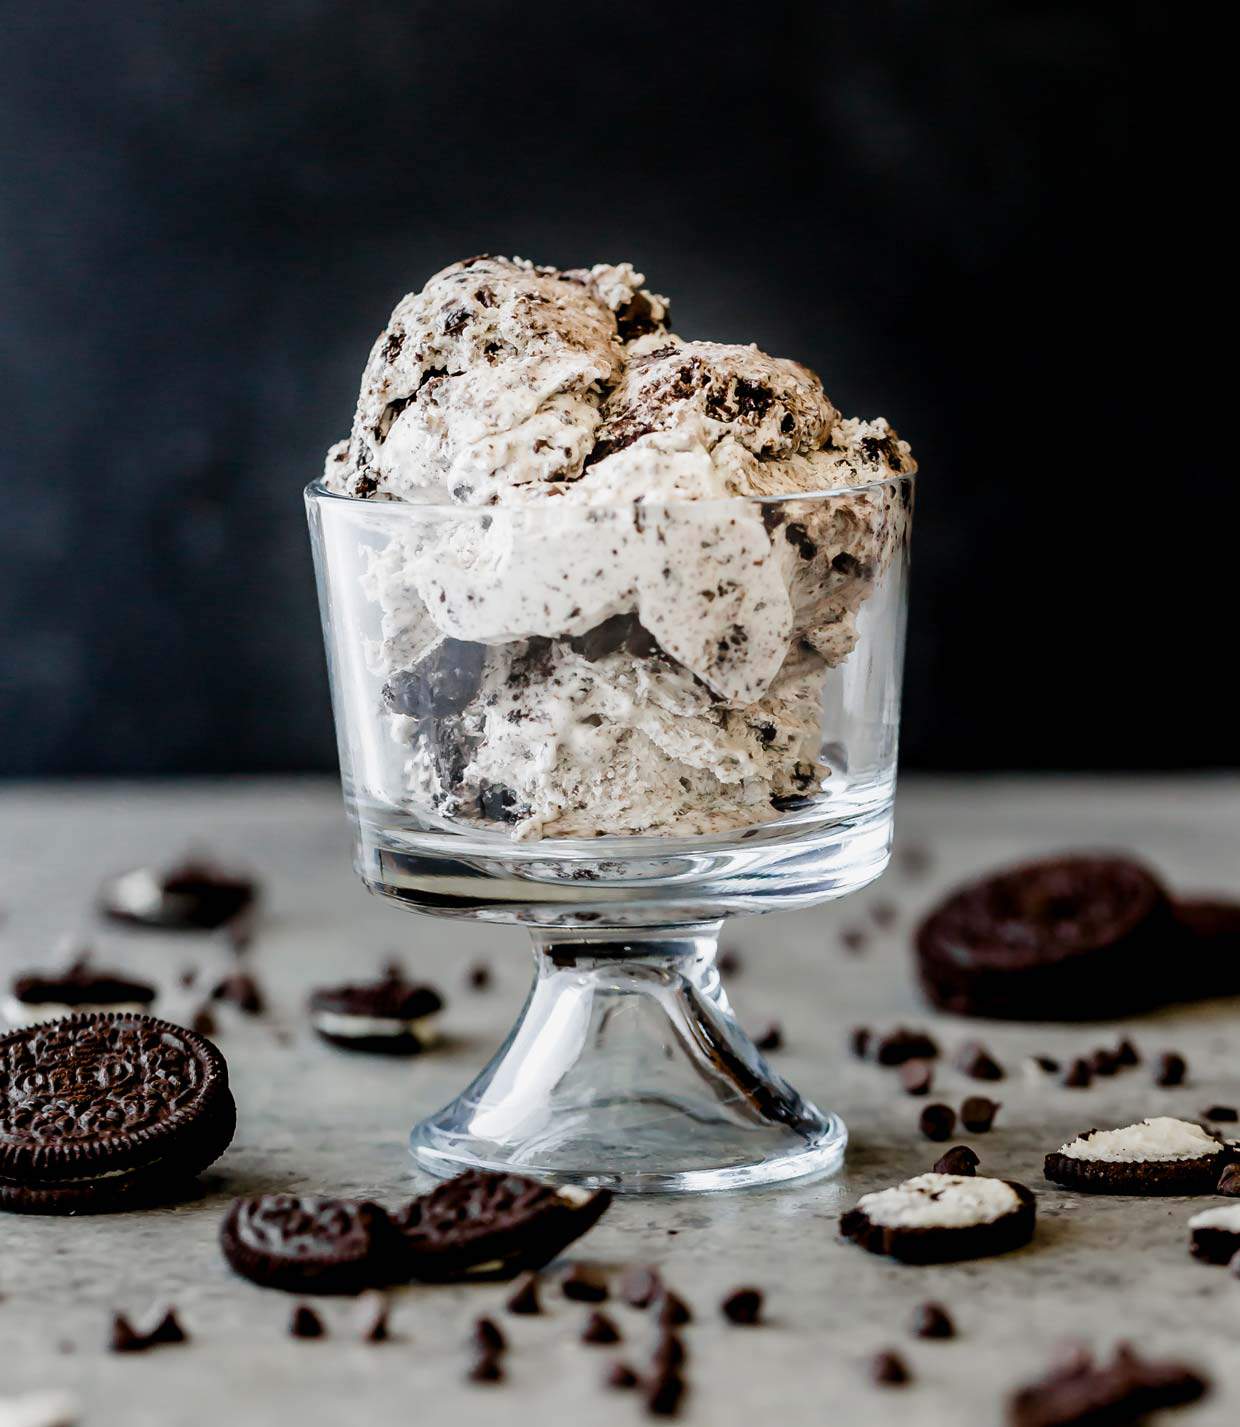 A glass bowl with homemade Oreo Ice Cream in it.